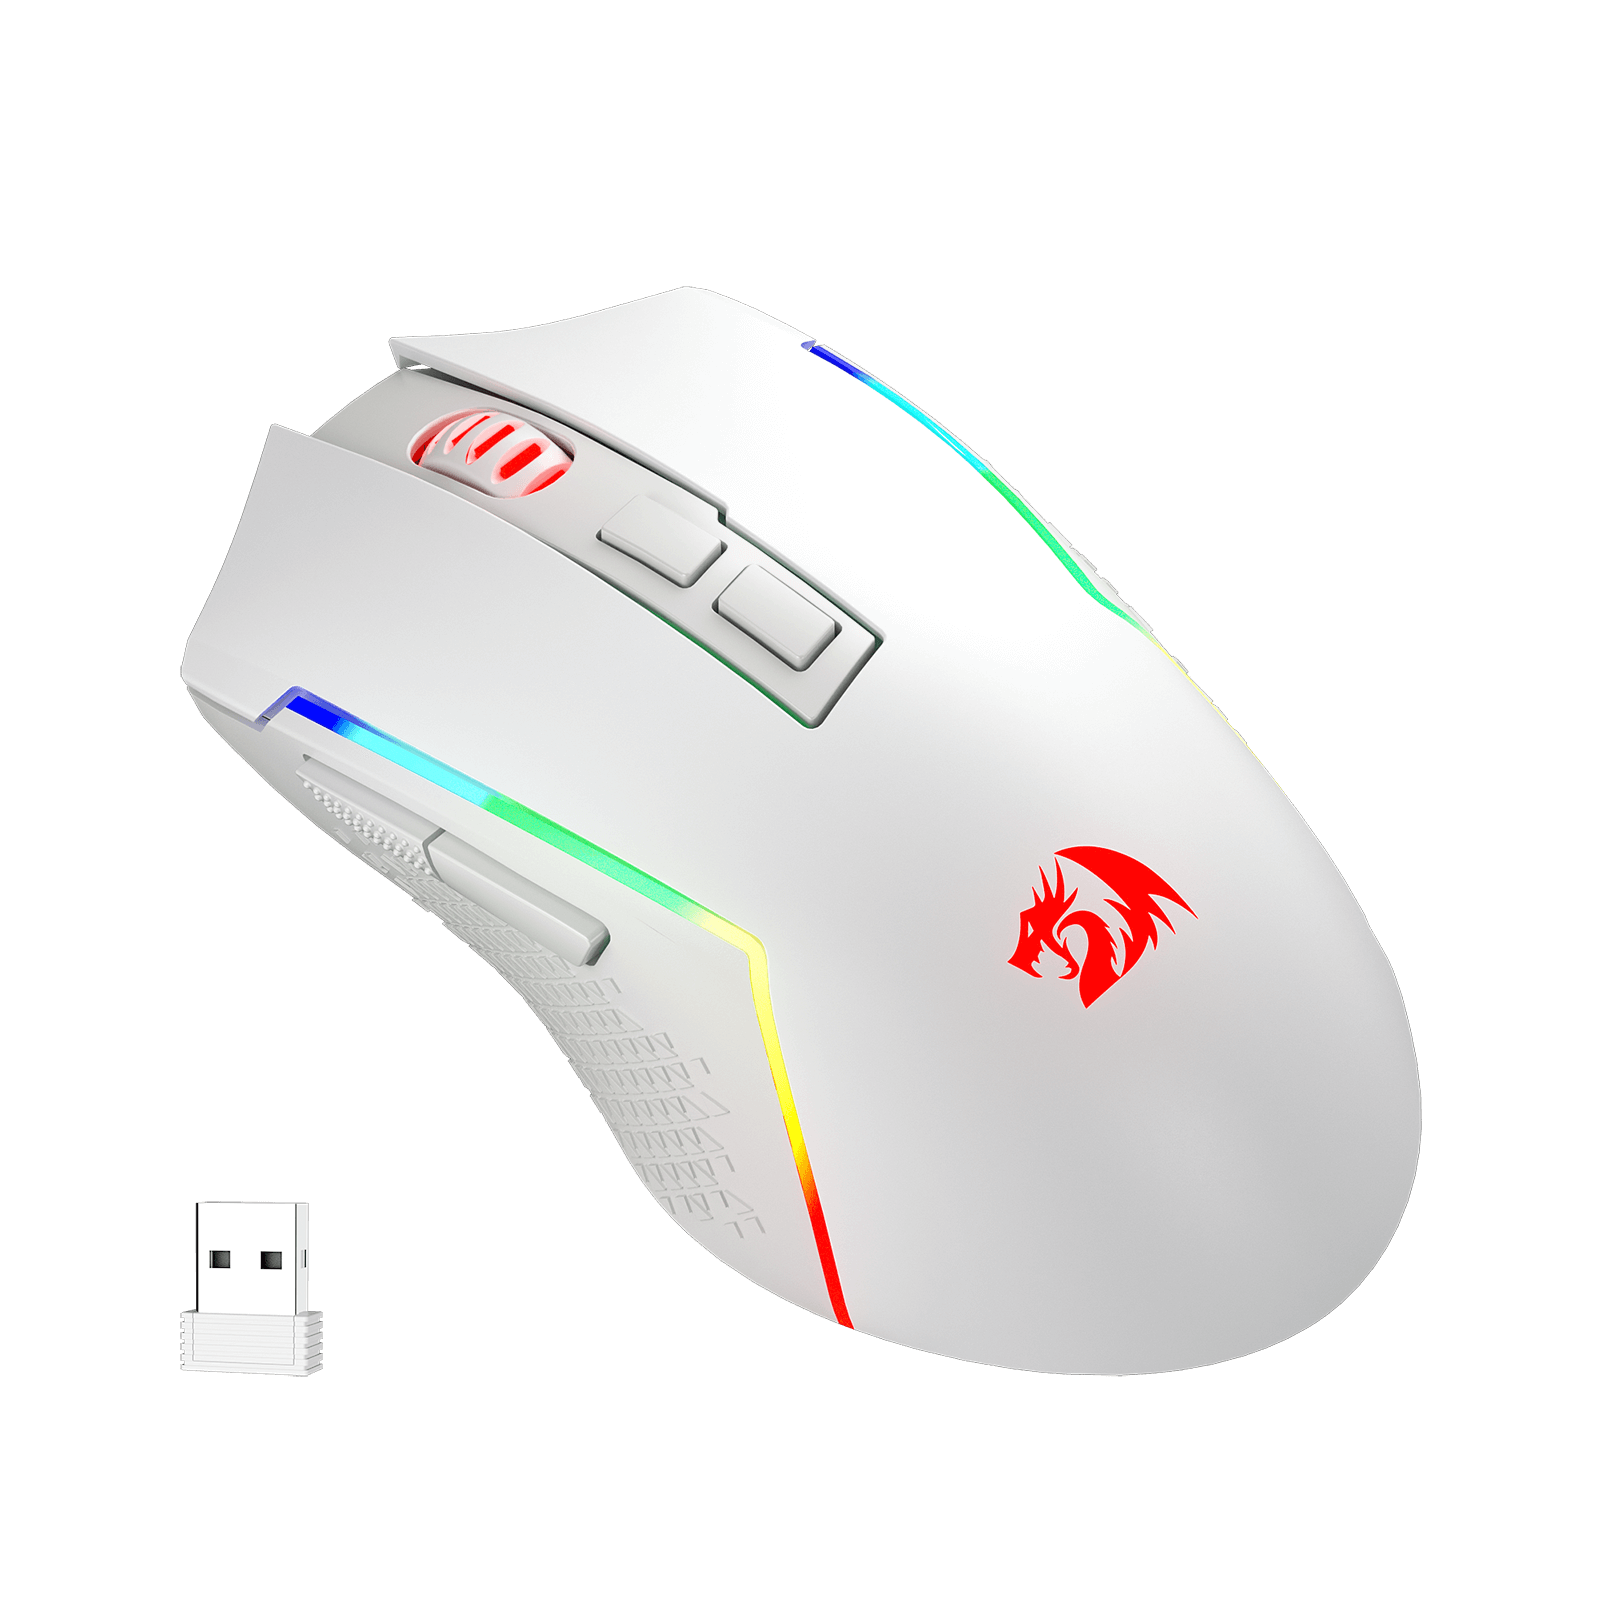 Redragon M693 Wireless Bluetooth Gaming Mouse